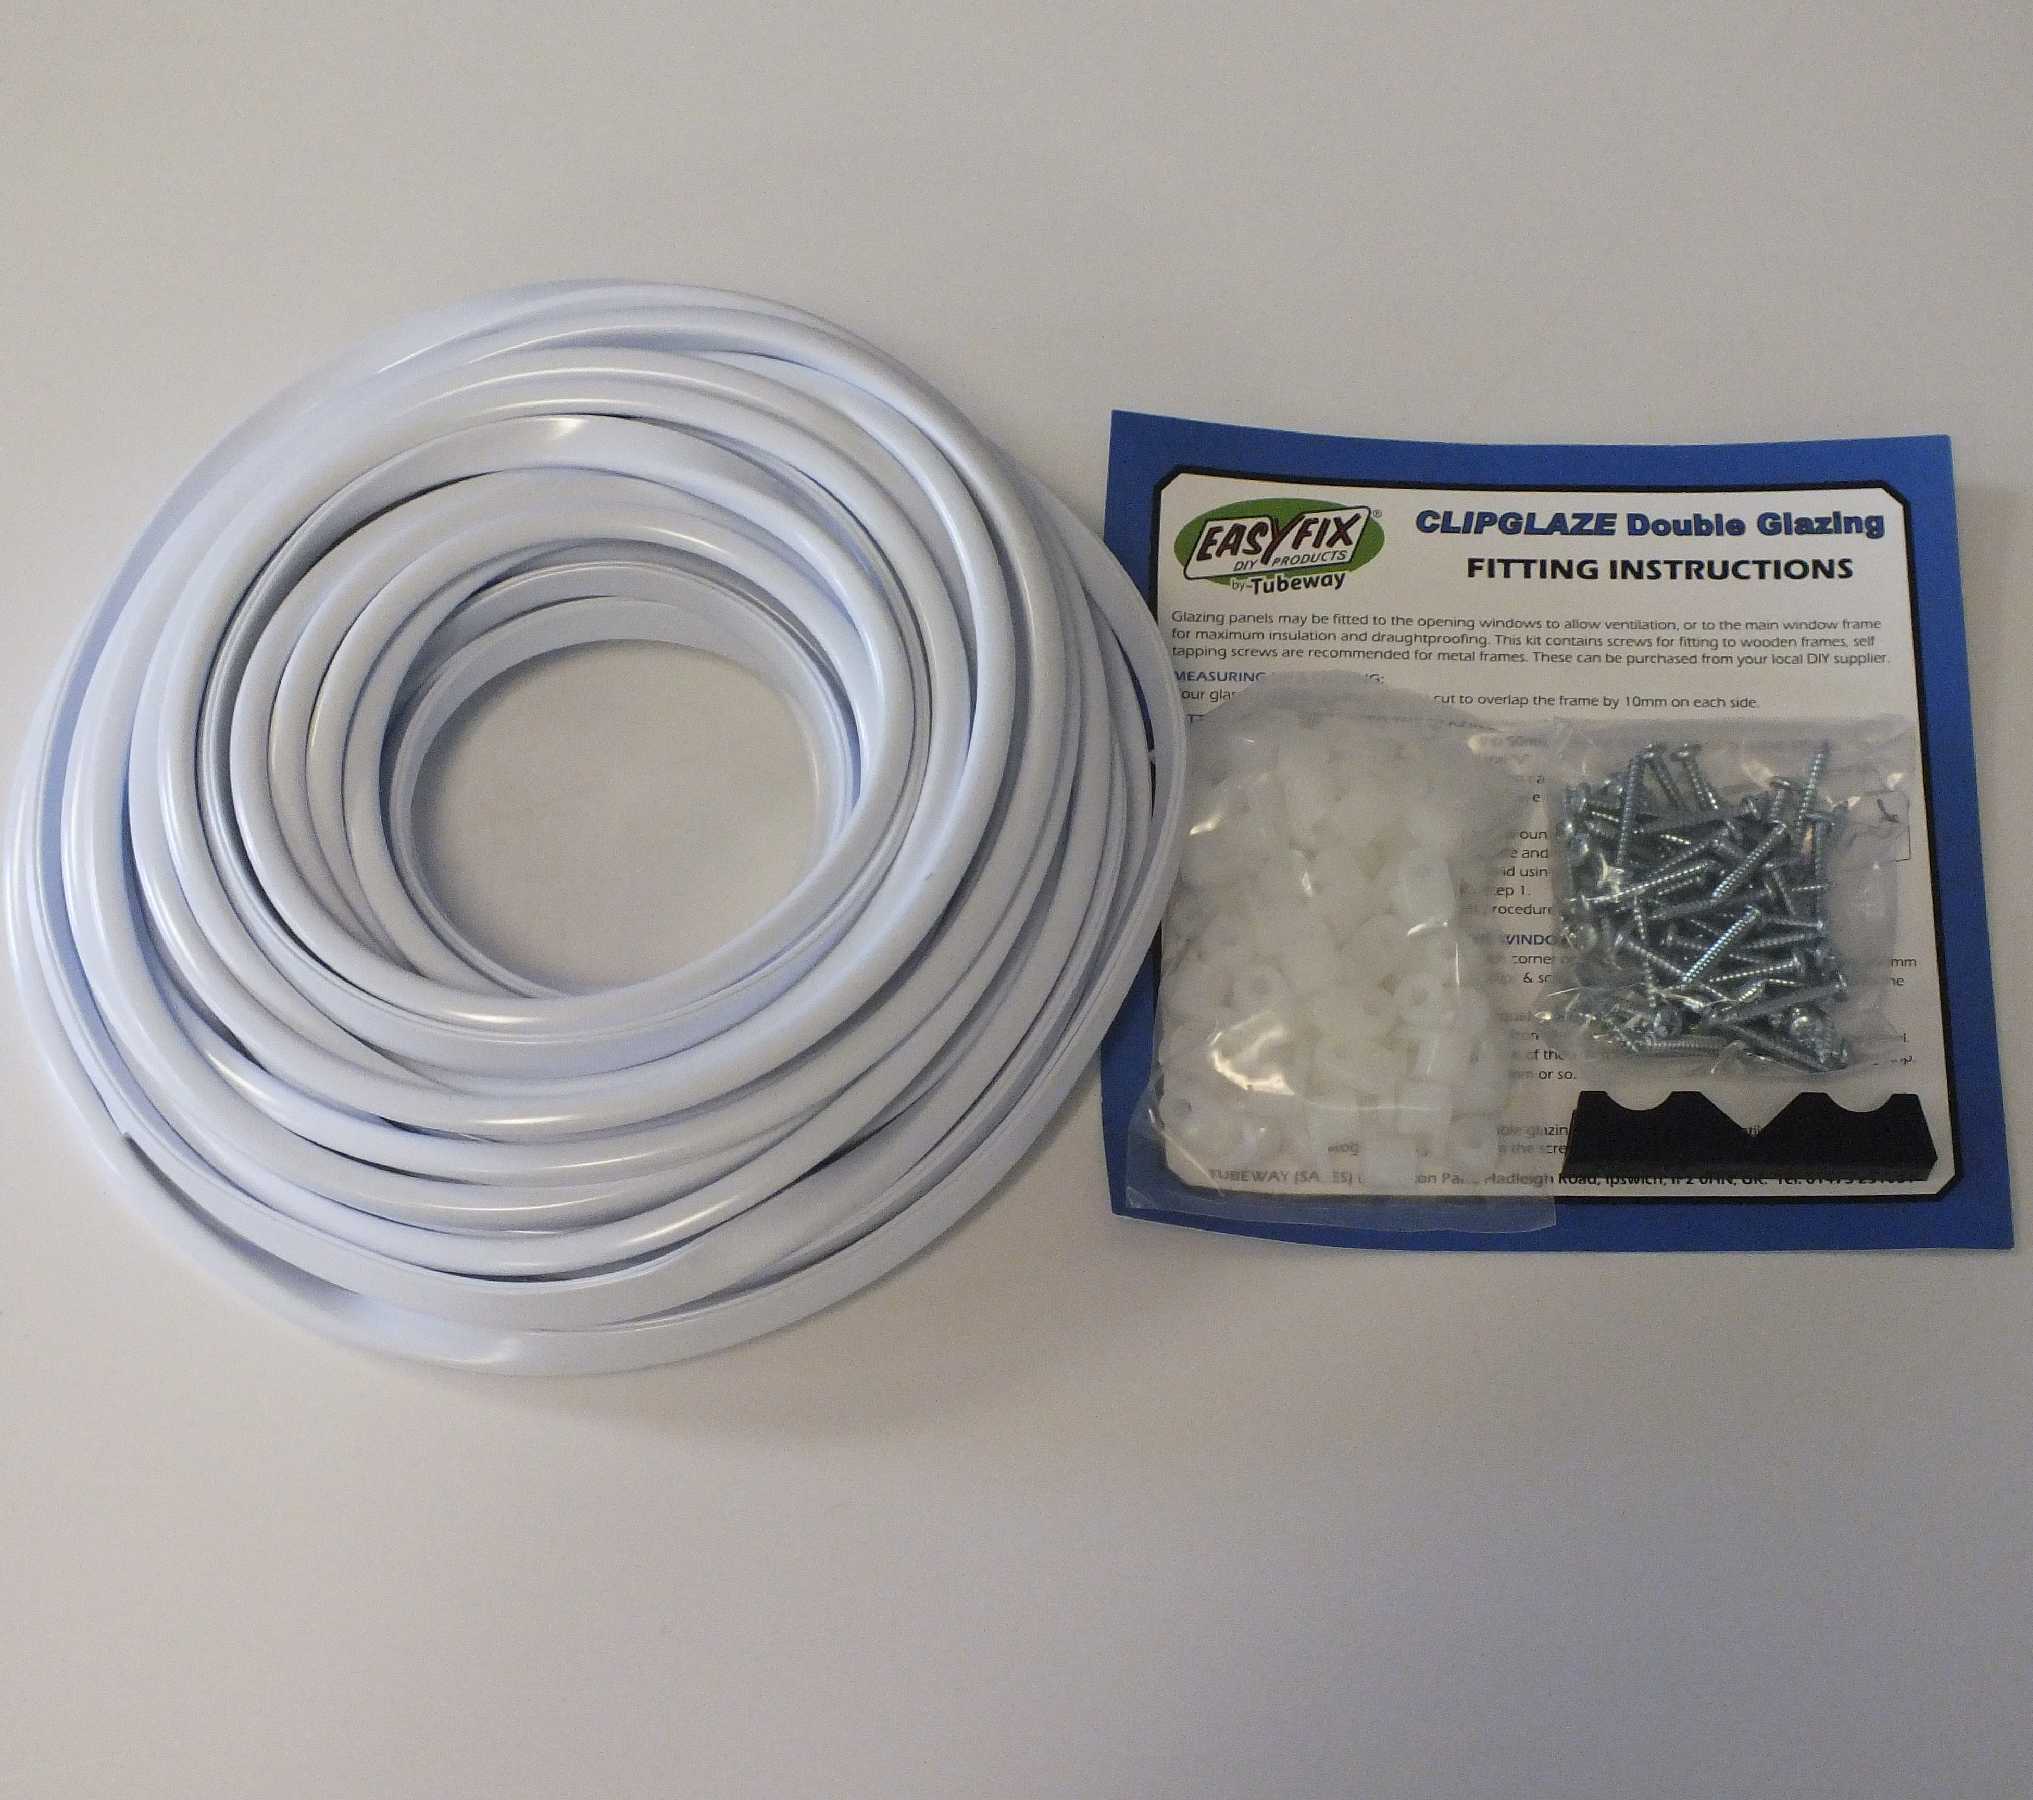 Easyfix Clipglaze Edging Kit - 15m roll of edging for 6mm Glazing Thickness, White or Clear